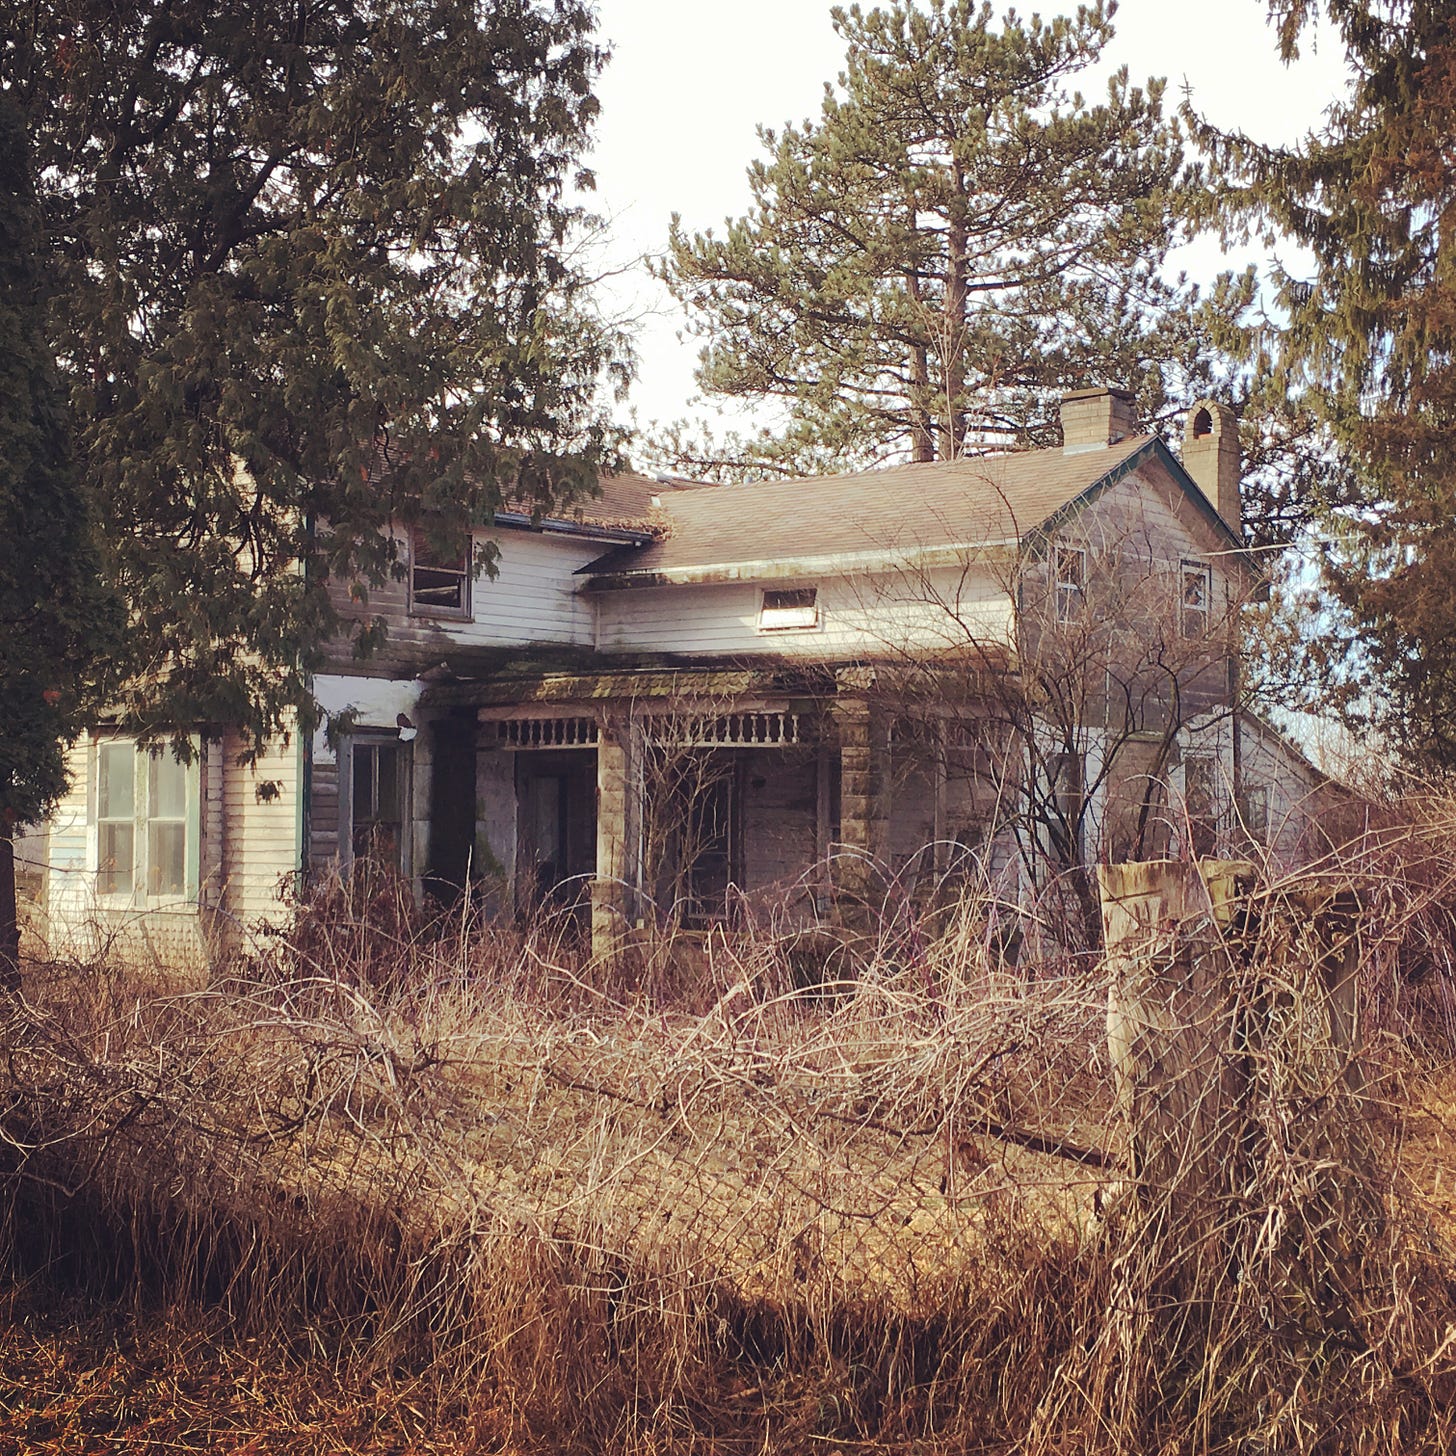 Photo of a decrepit farmhouse surrounded by pine trees.